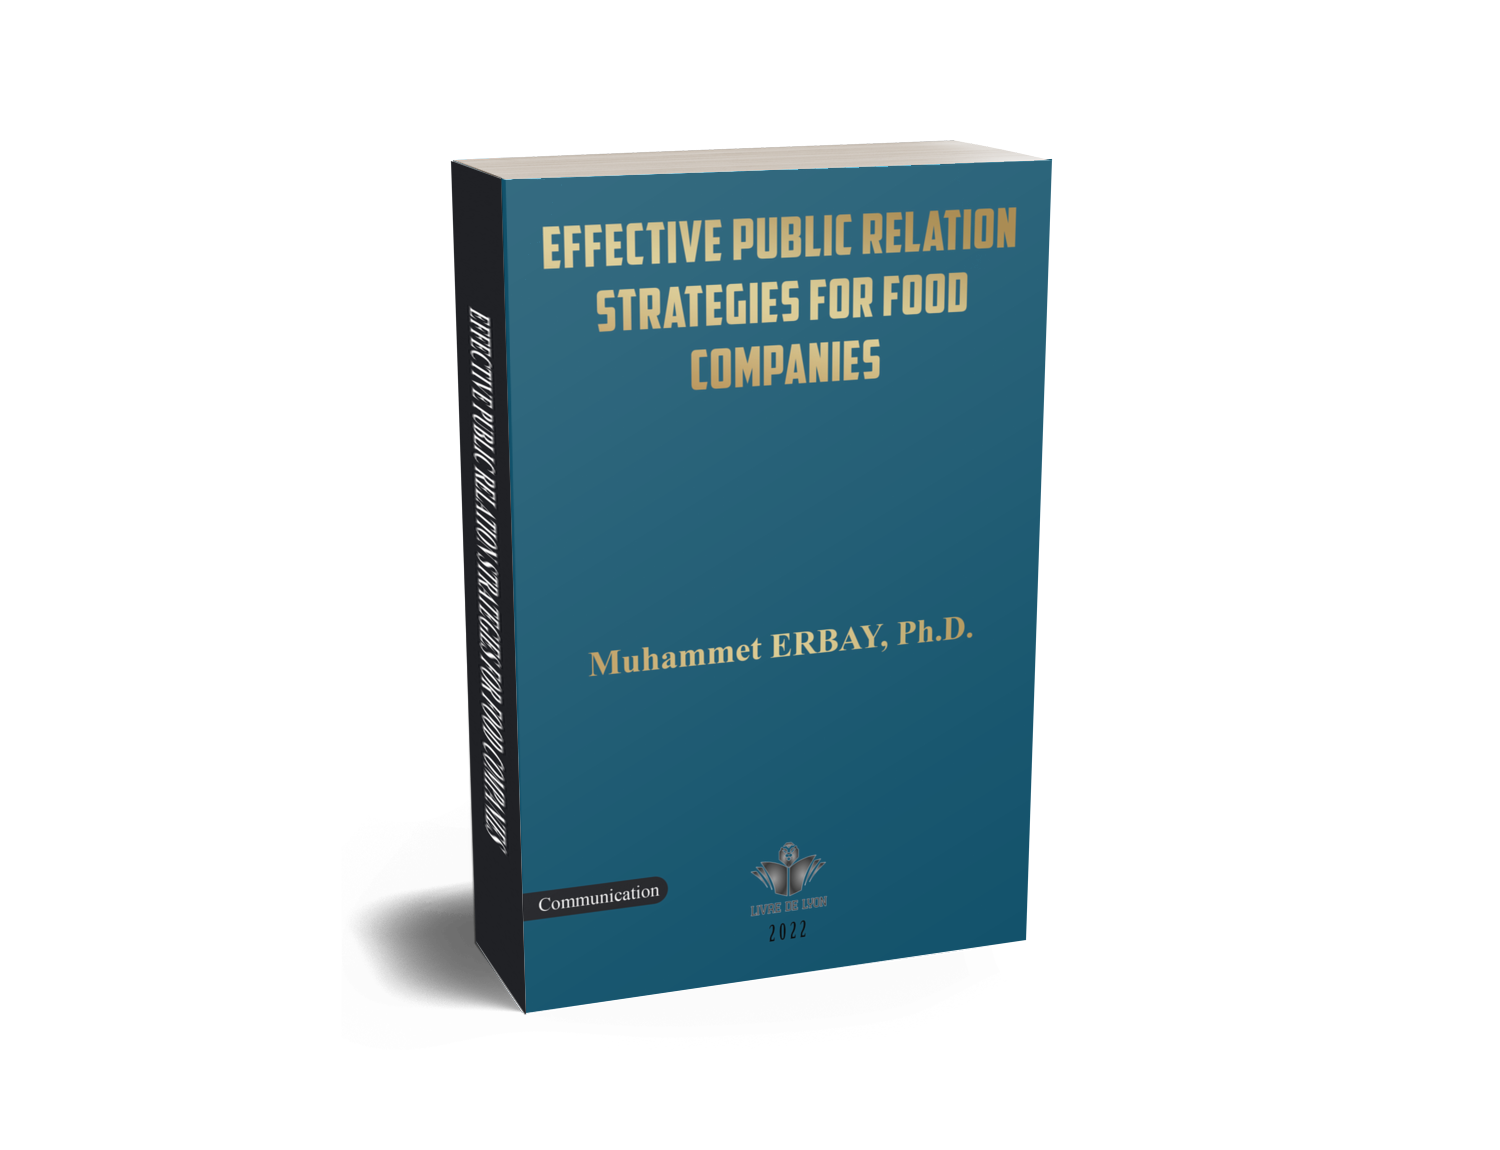 Effective Public Relation Strategies for Food Companies